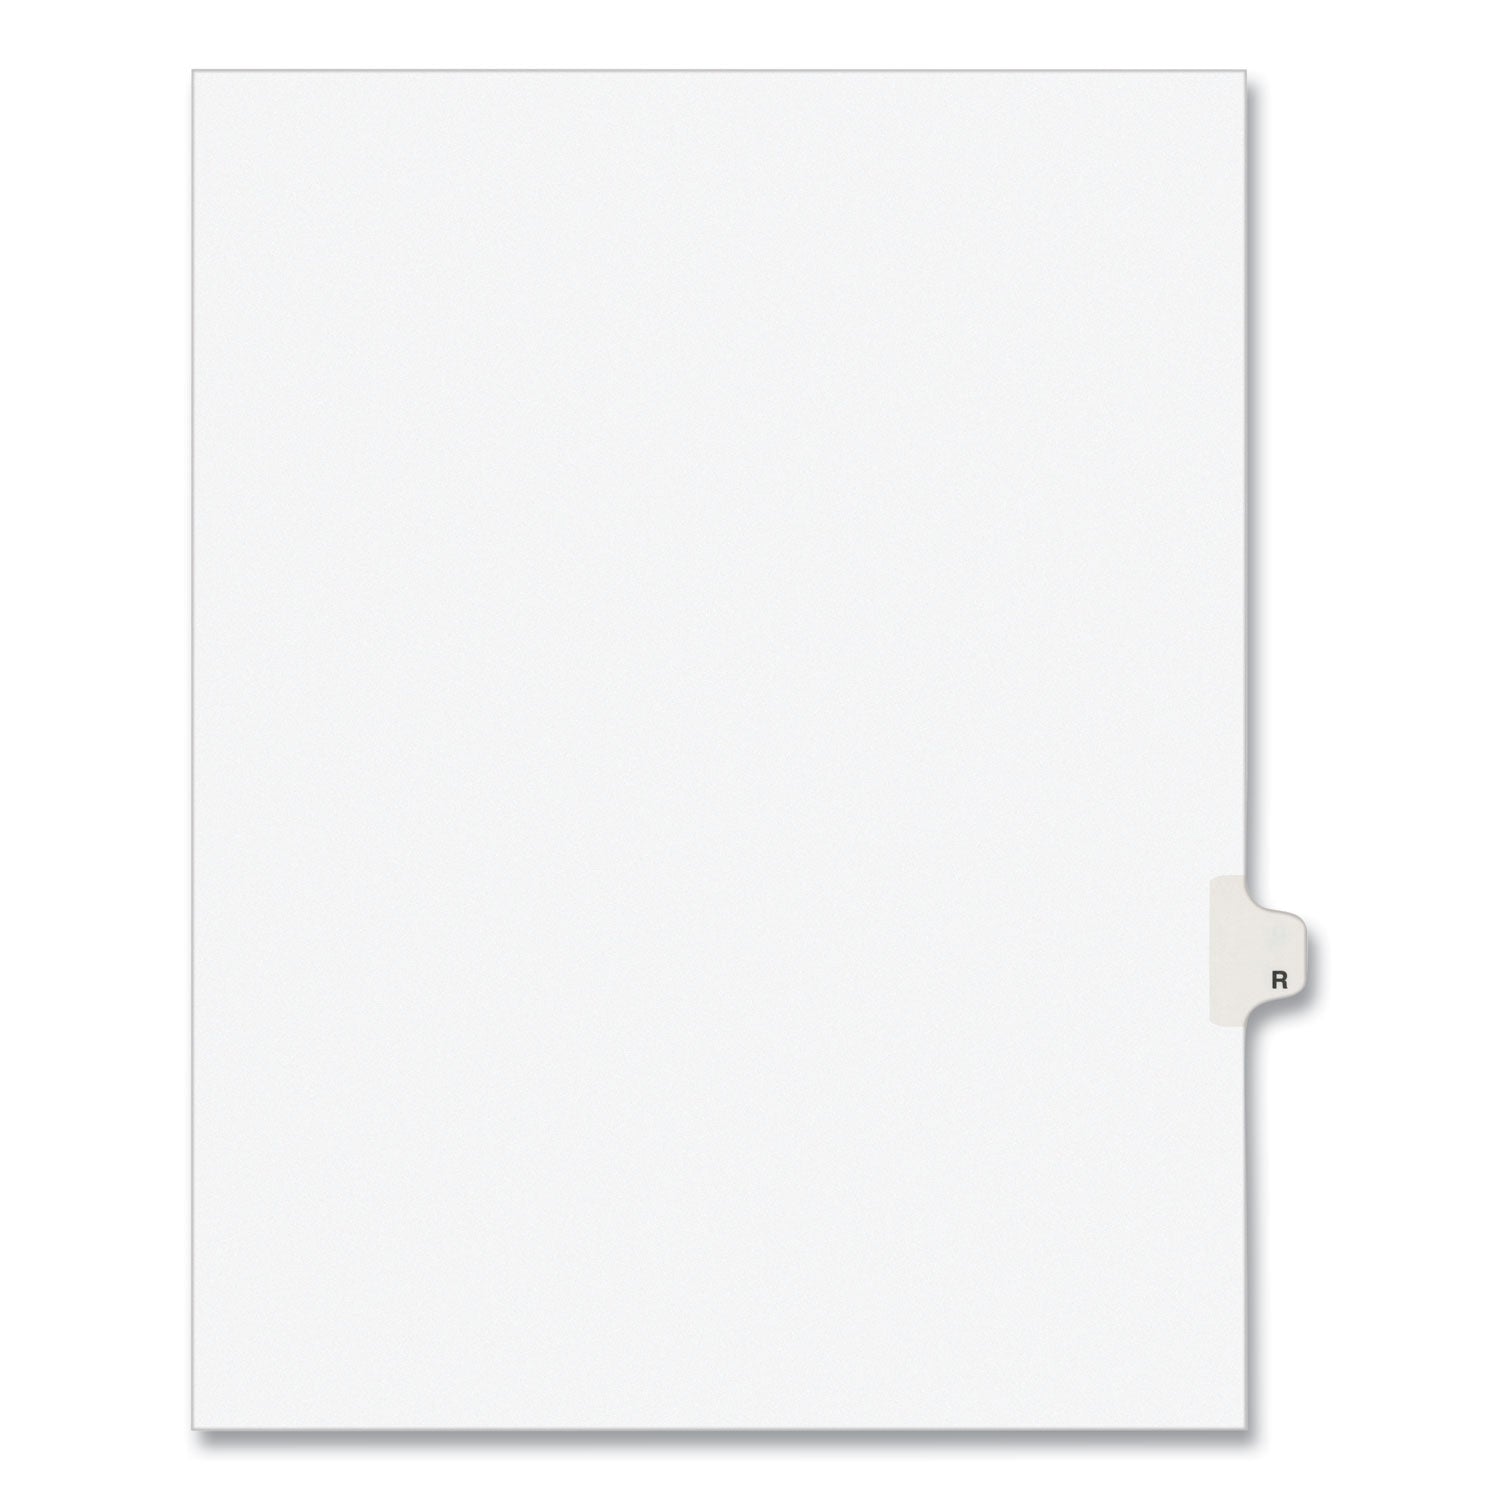 Preprinted Legal Exhibit Side Tab Index Dividers, Avery Style, 26-Tab, R, 11 x 8.5, White, 25/Pack, (1418) - 